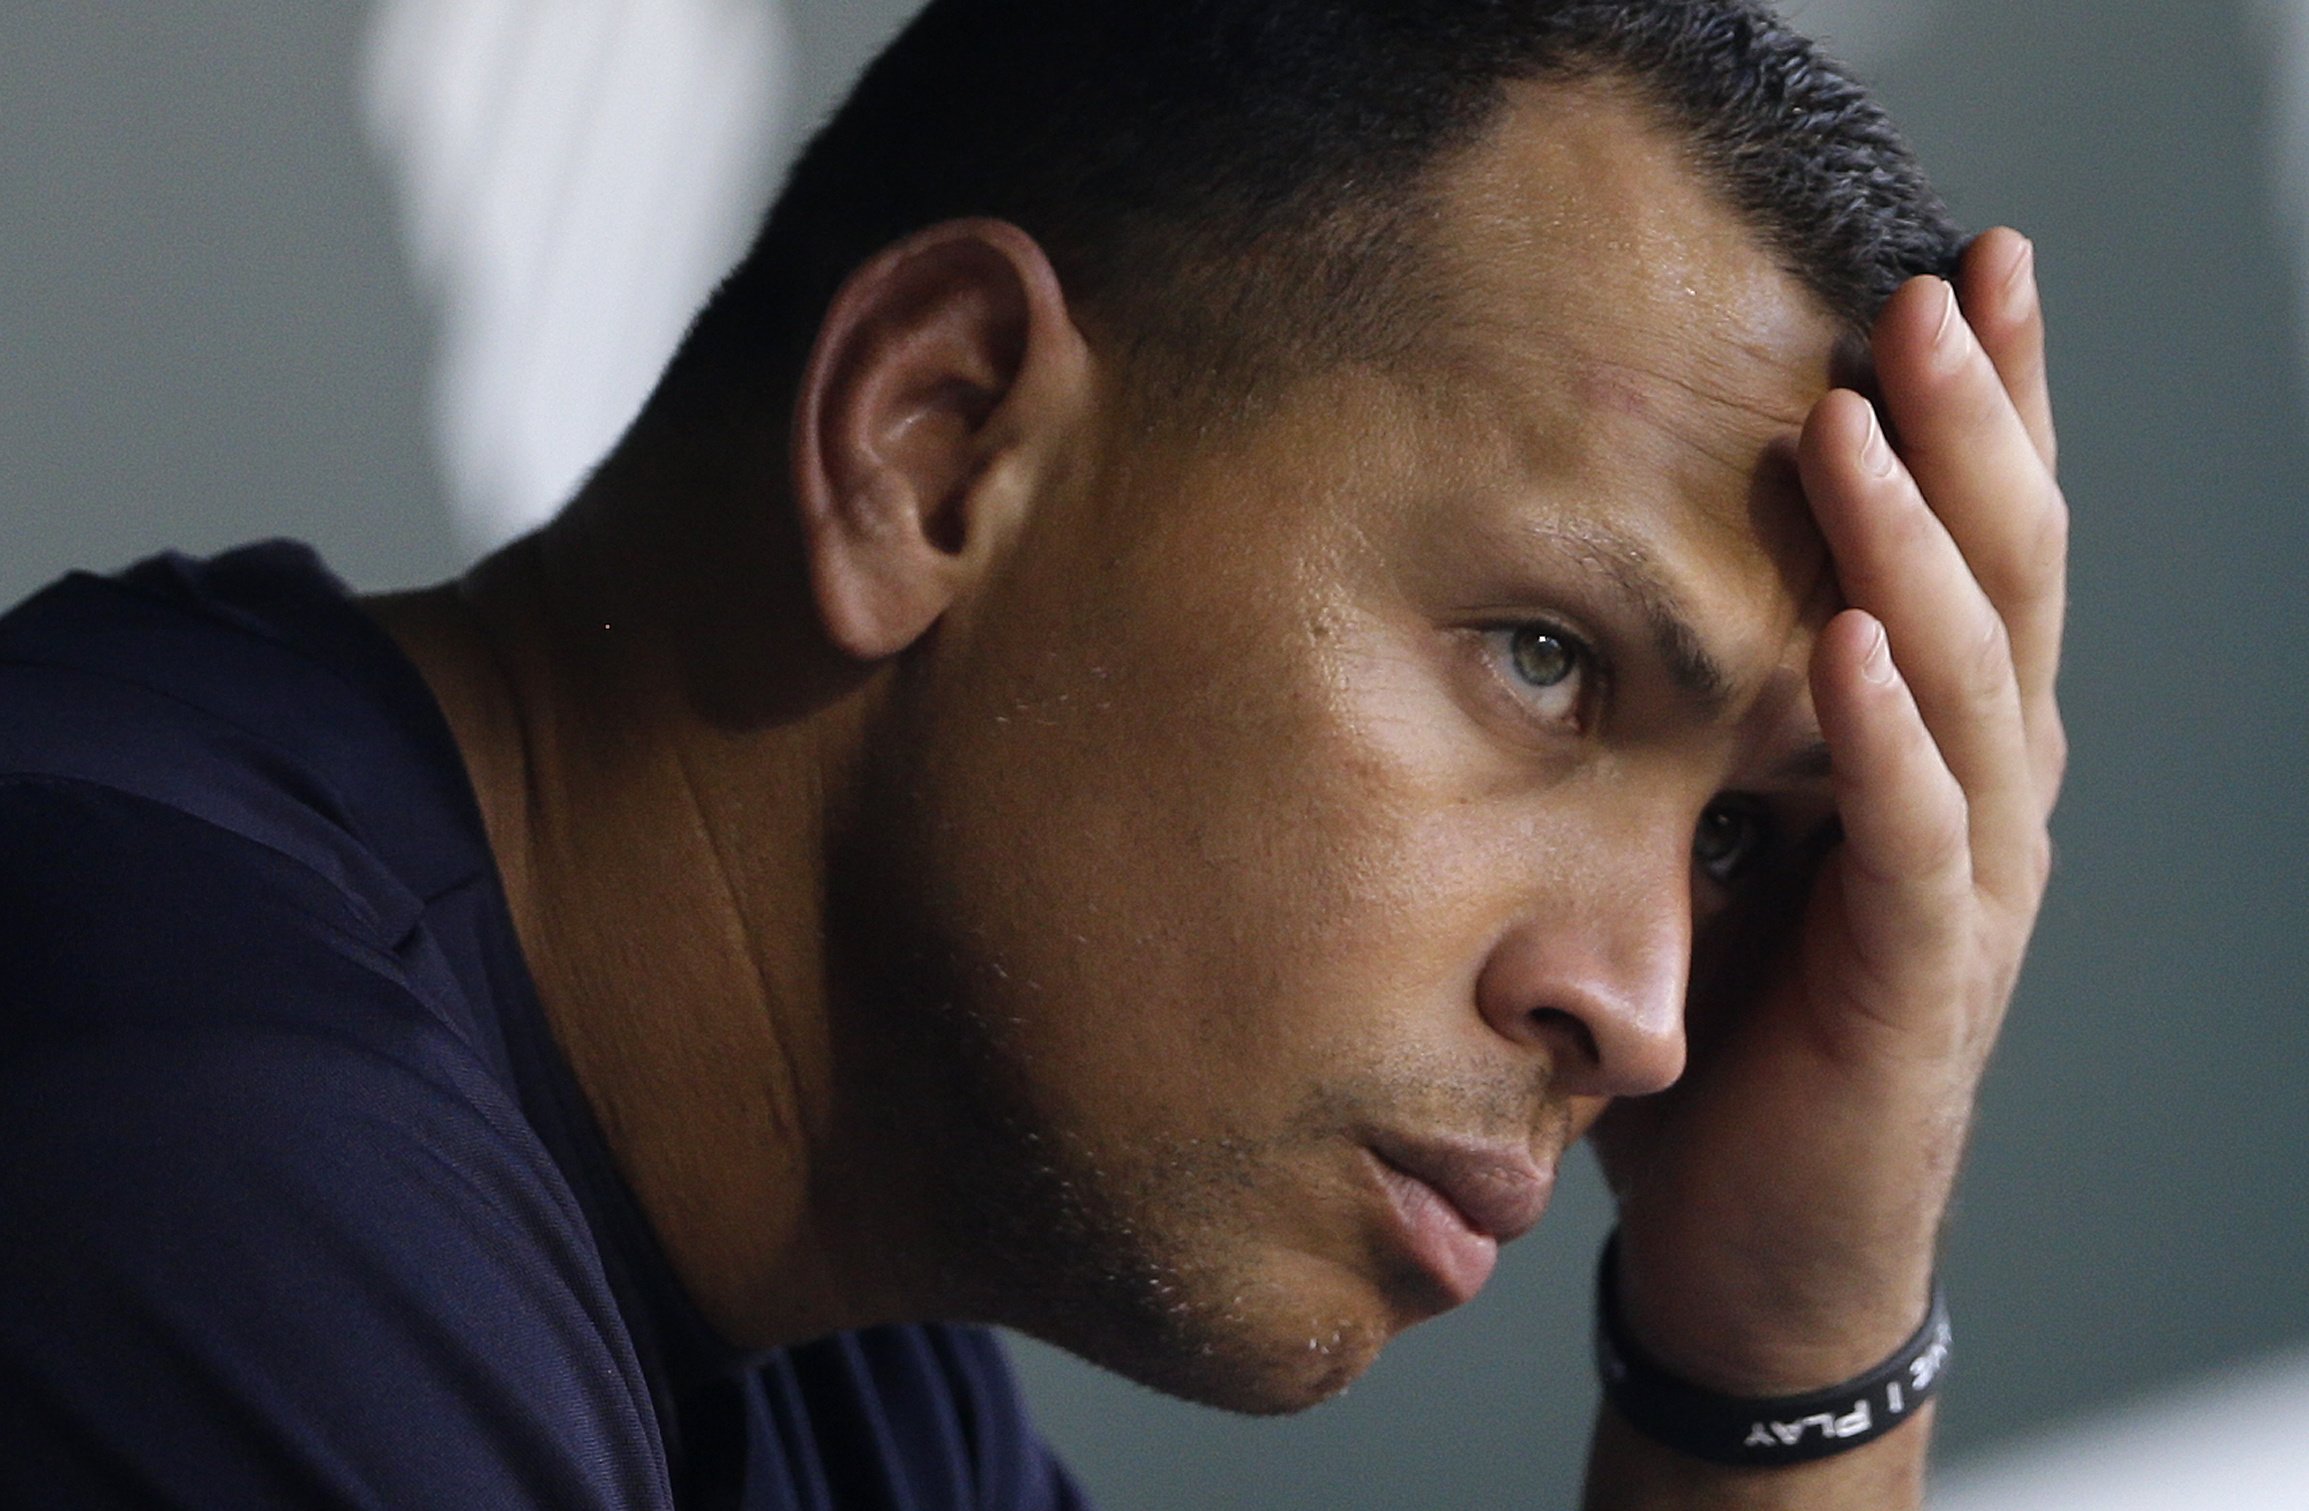 New York Yankees' Alex Rodriguez wipes sweat from his brow as he sits in the dugout before a baseball game against the Baltimore Orioles in Baltimore on Sept. 11, 2013.